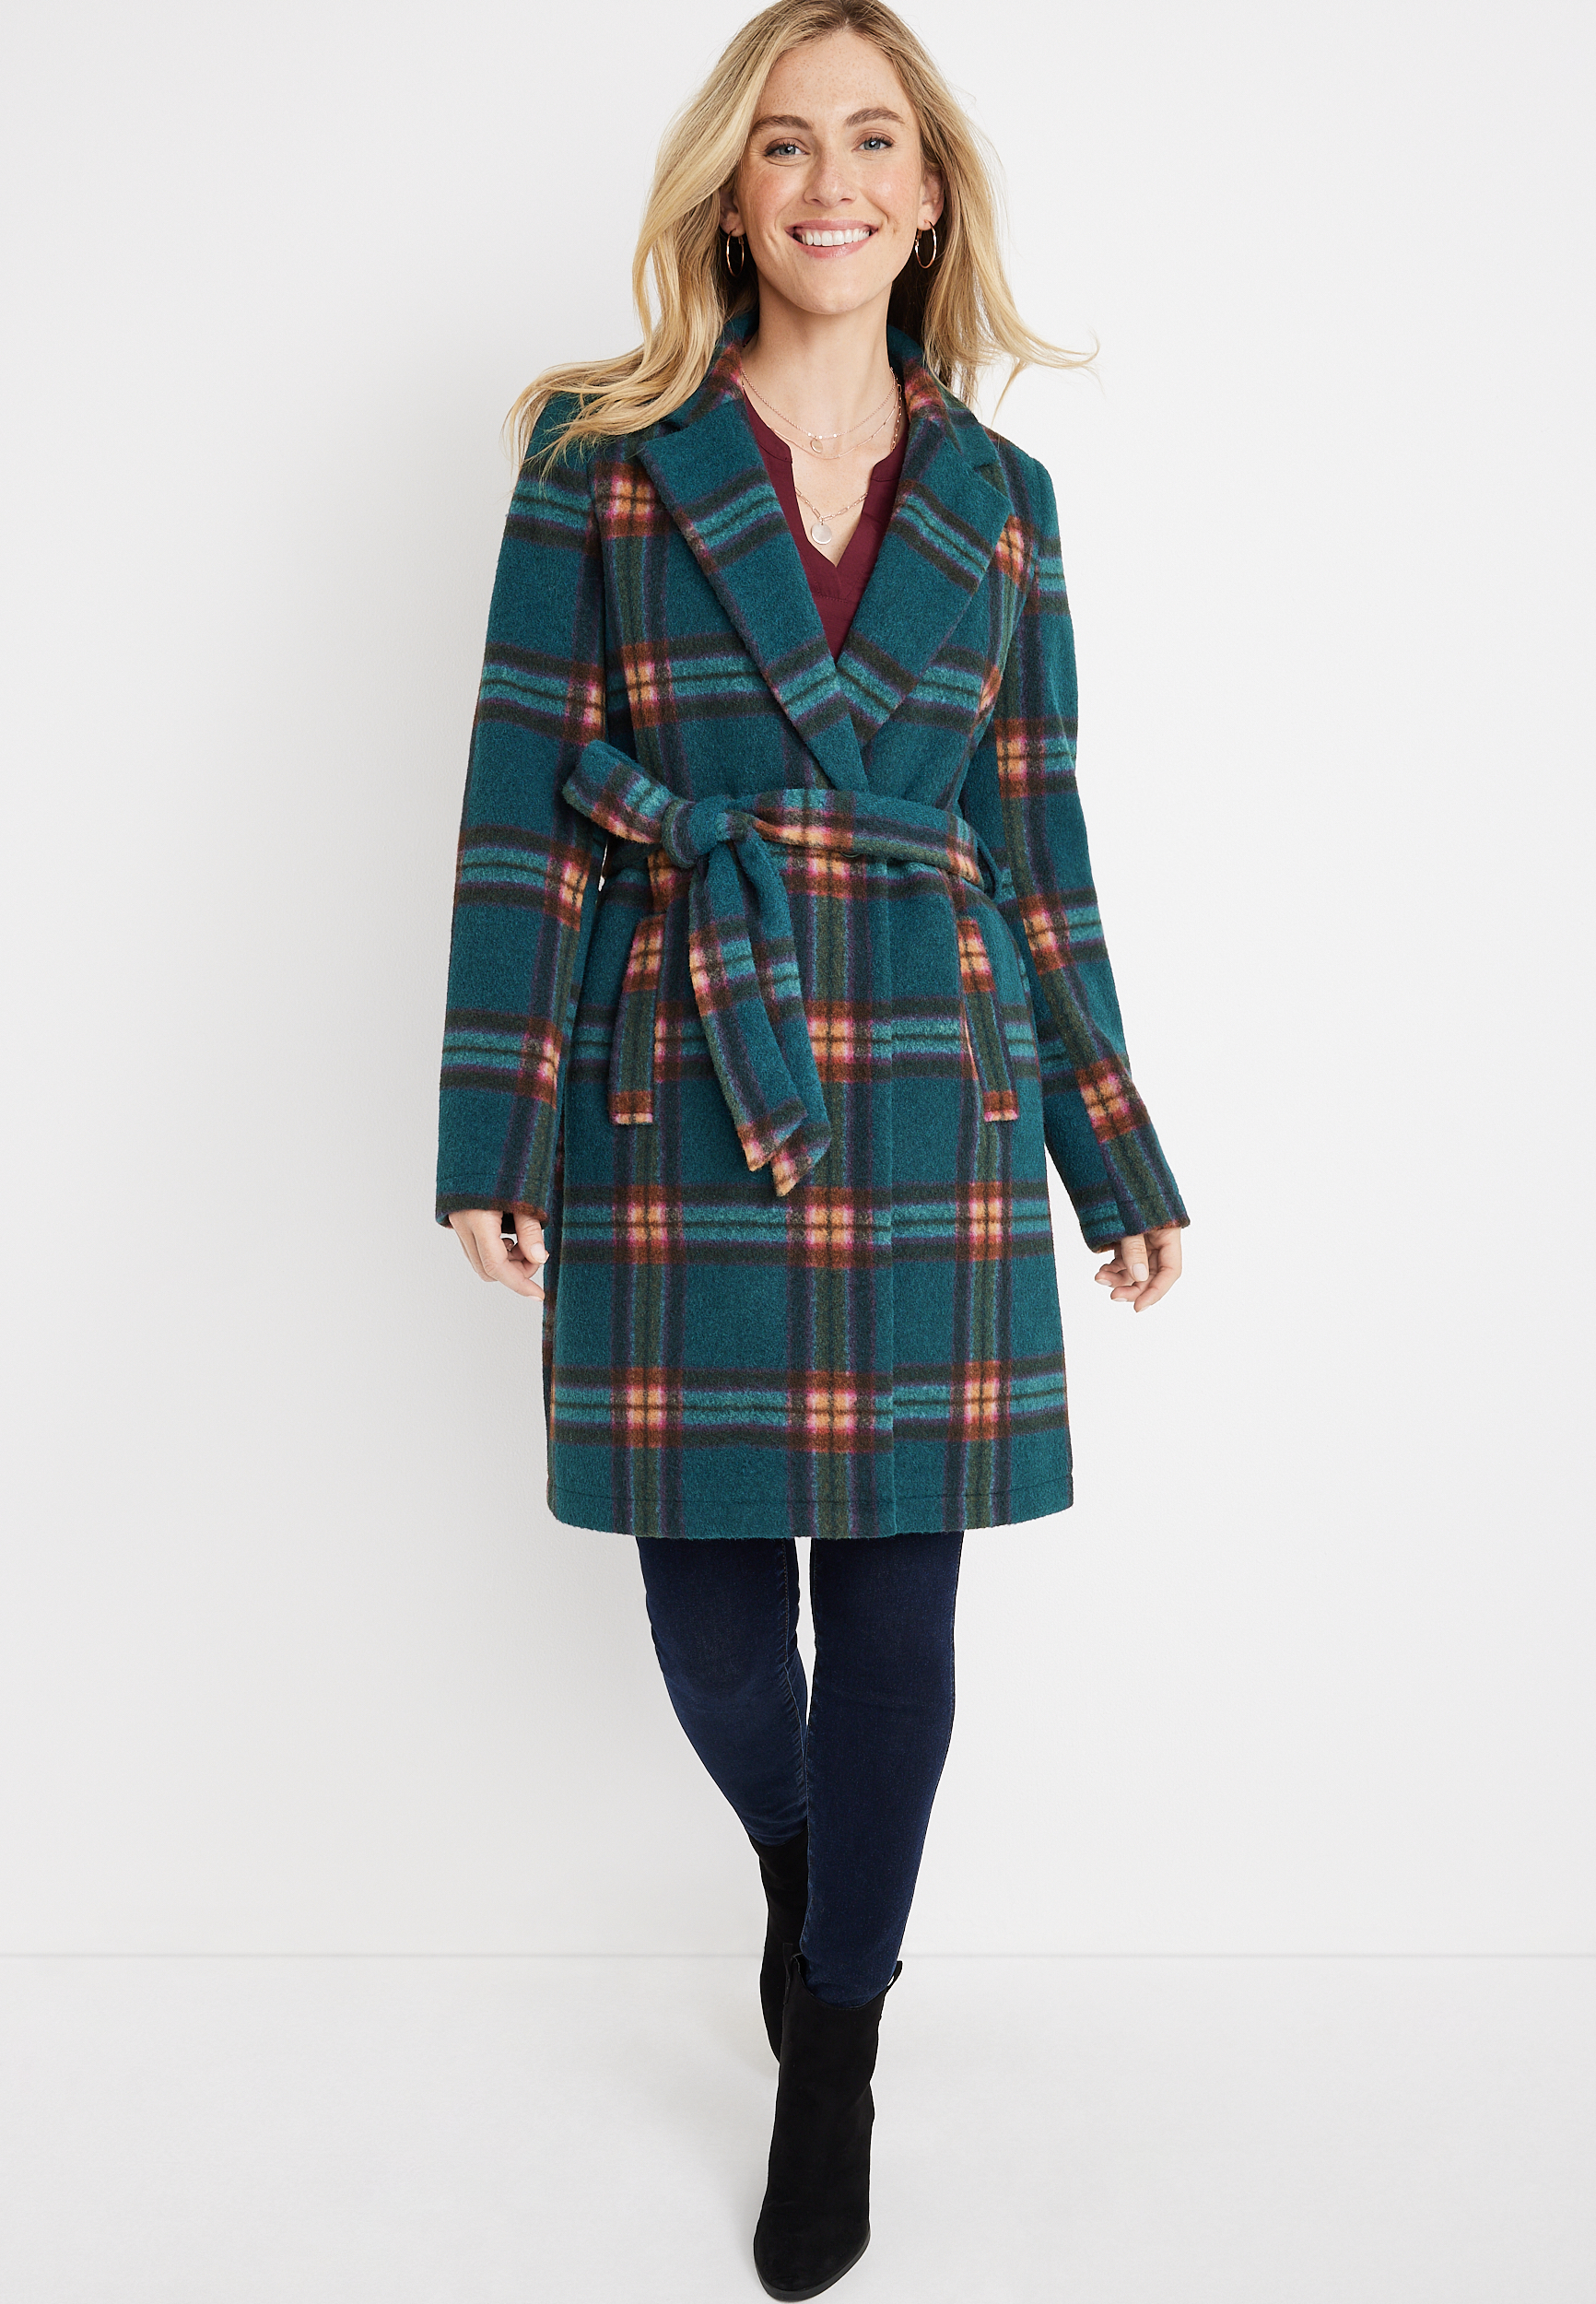 Teal Plaid Belted Wrap Coat | maurices